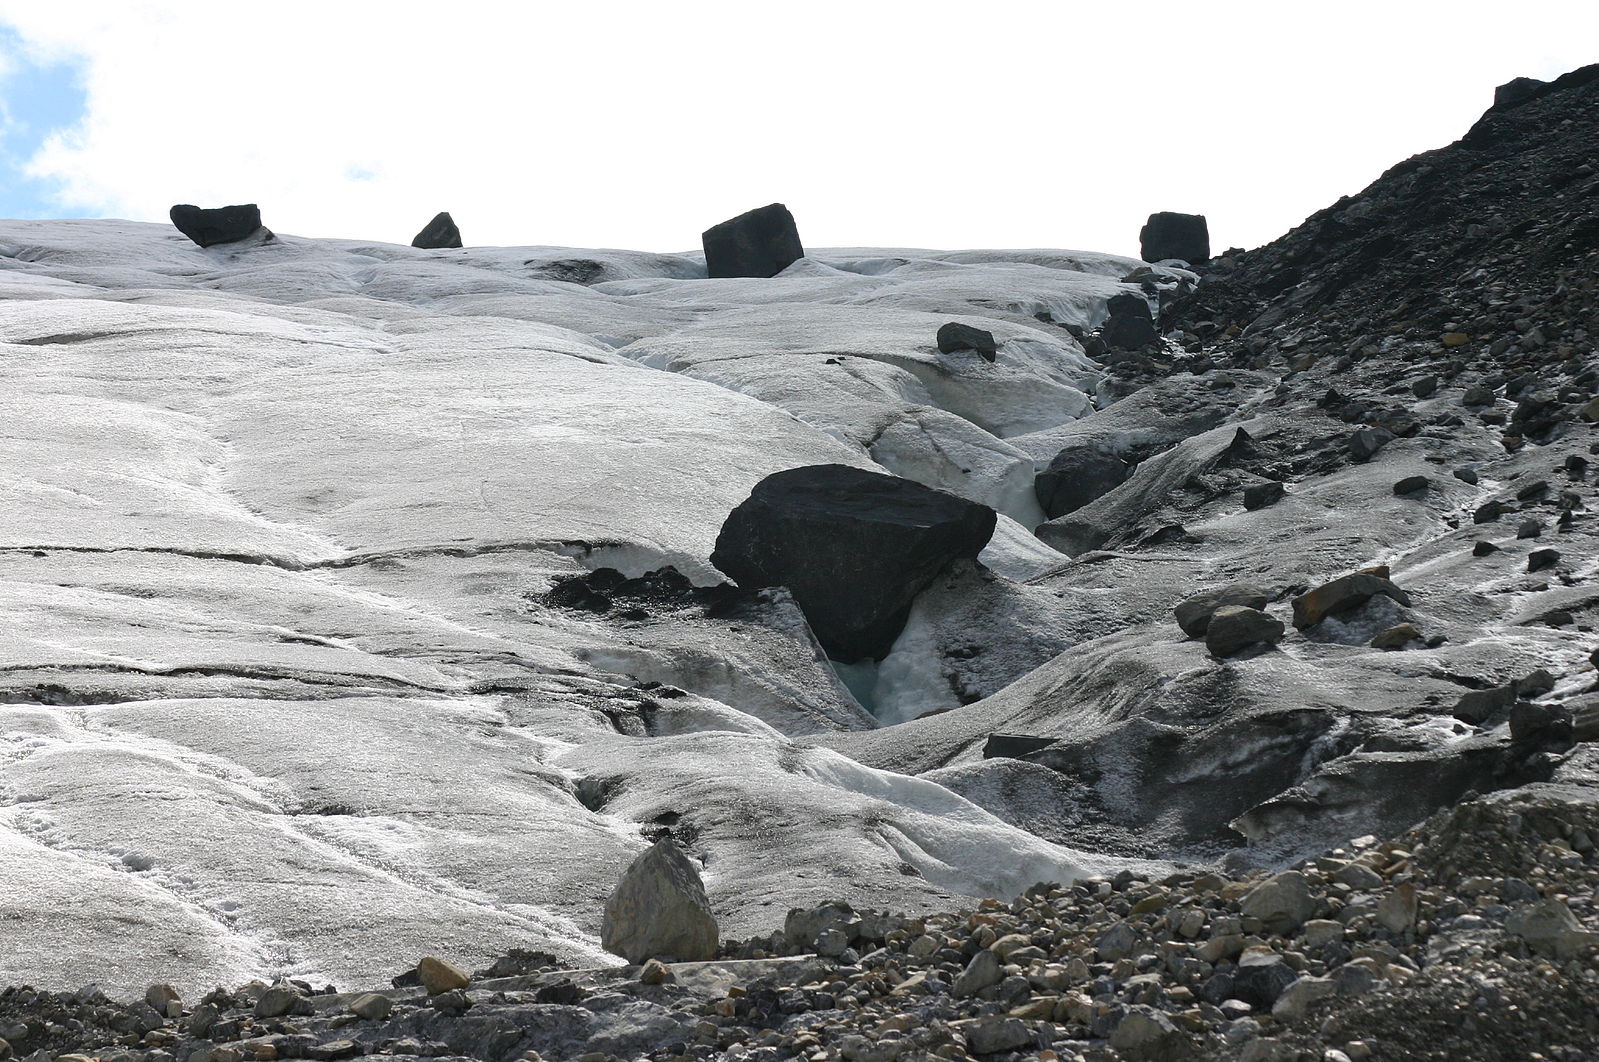 Along the edge of glacial ice, numerous broken pieces of tan, gray, and black rocks lay along the edge, ranging in size from large boulders to tiny bits.